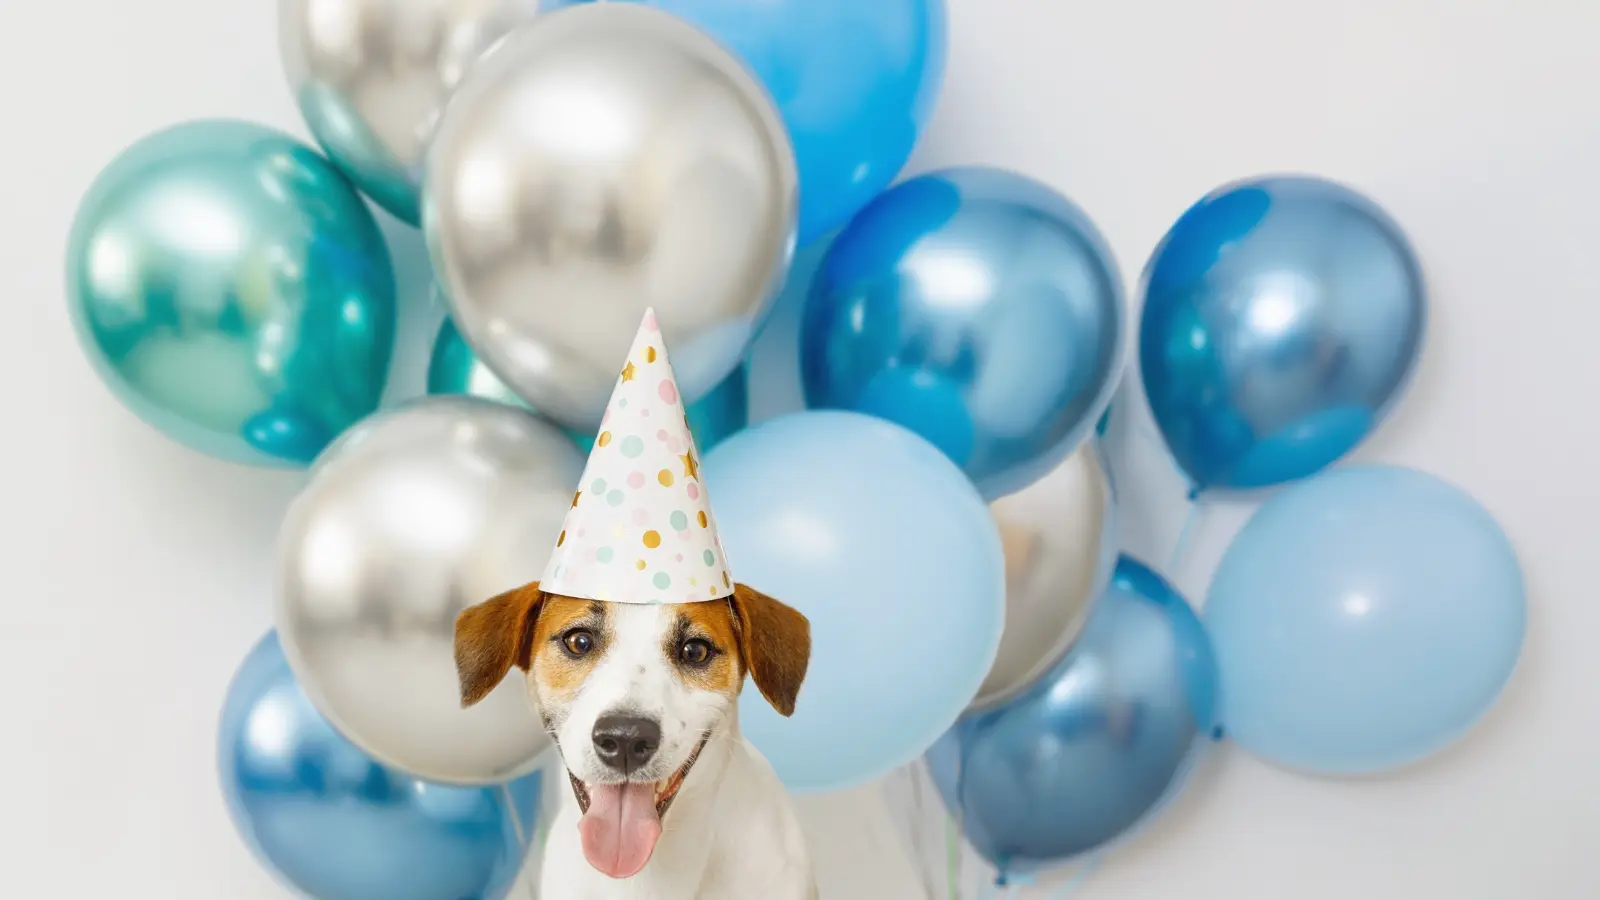 Popular Themes for Dog Birthday Parties